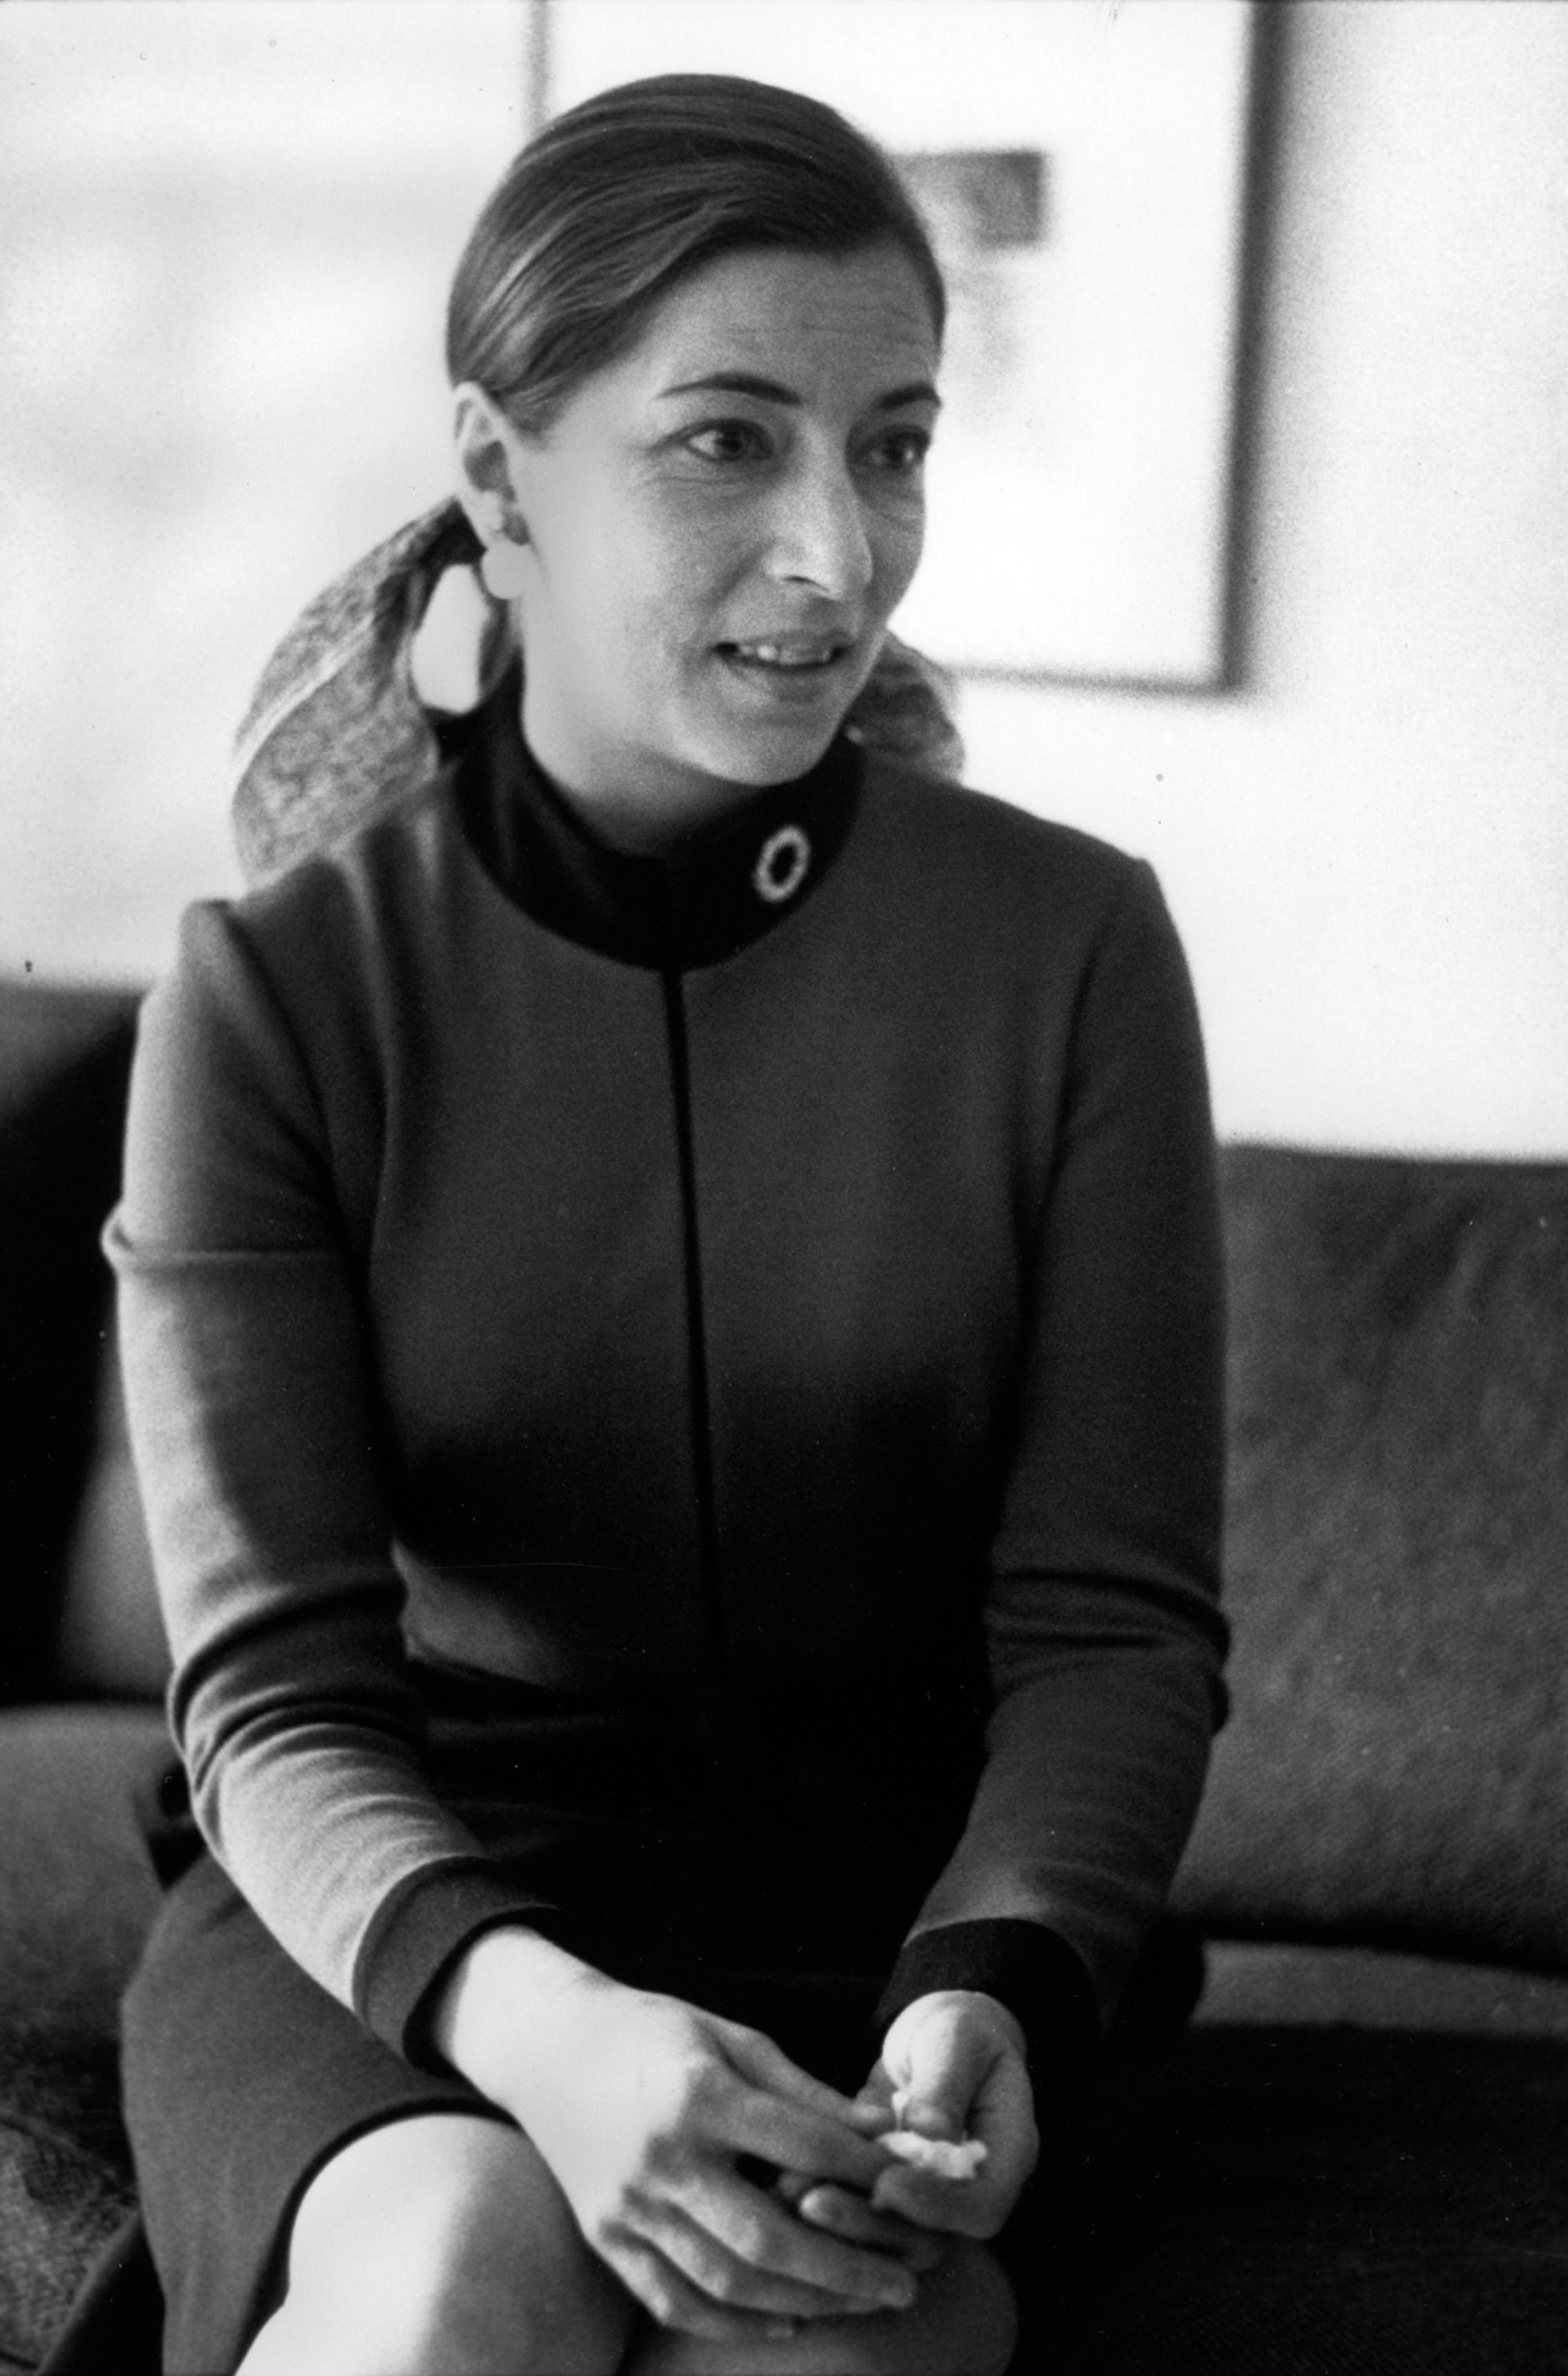 Ruth Bader Ginsburg in New York, when she was named a professor at Columbia Law School.